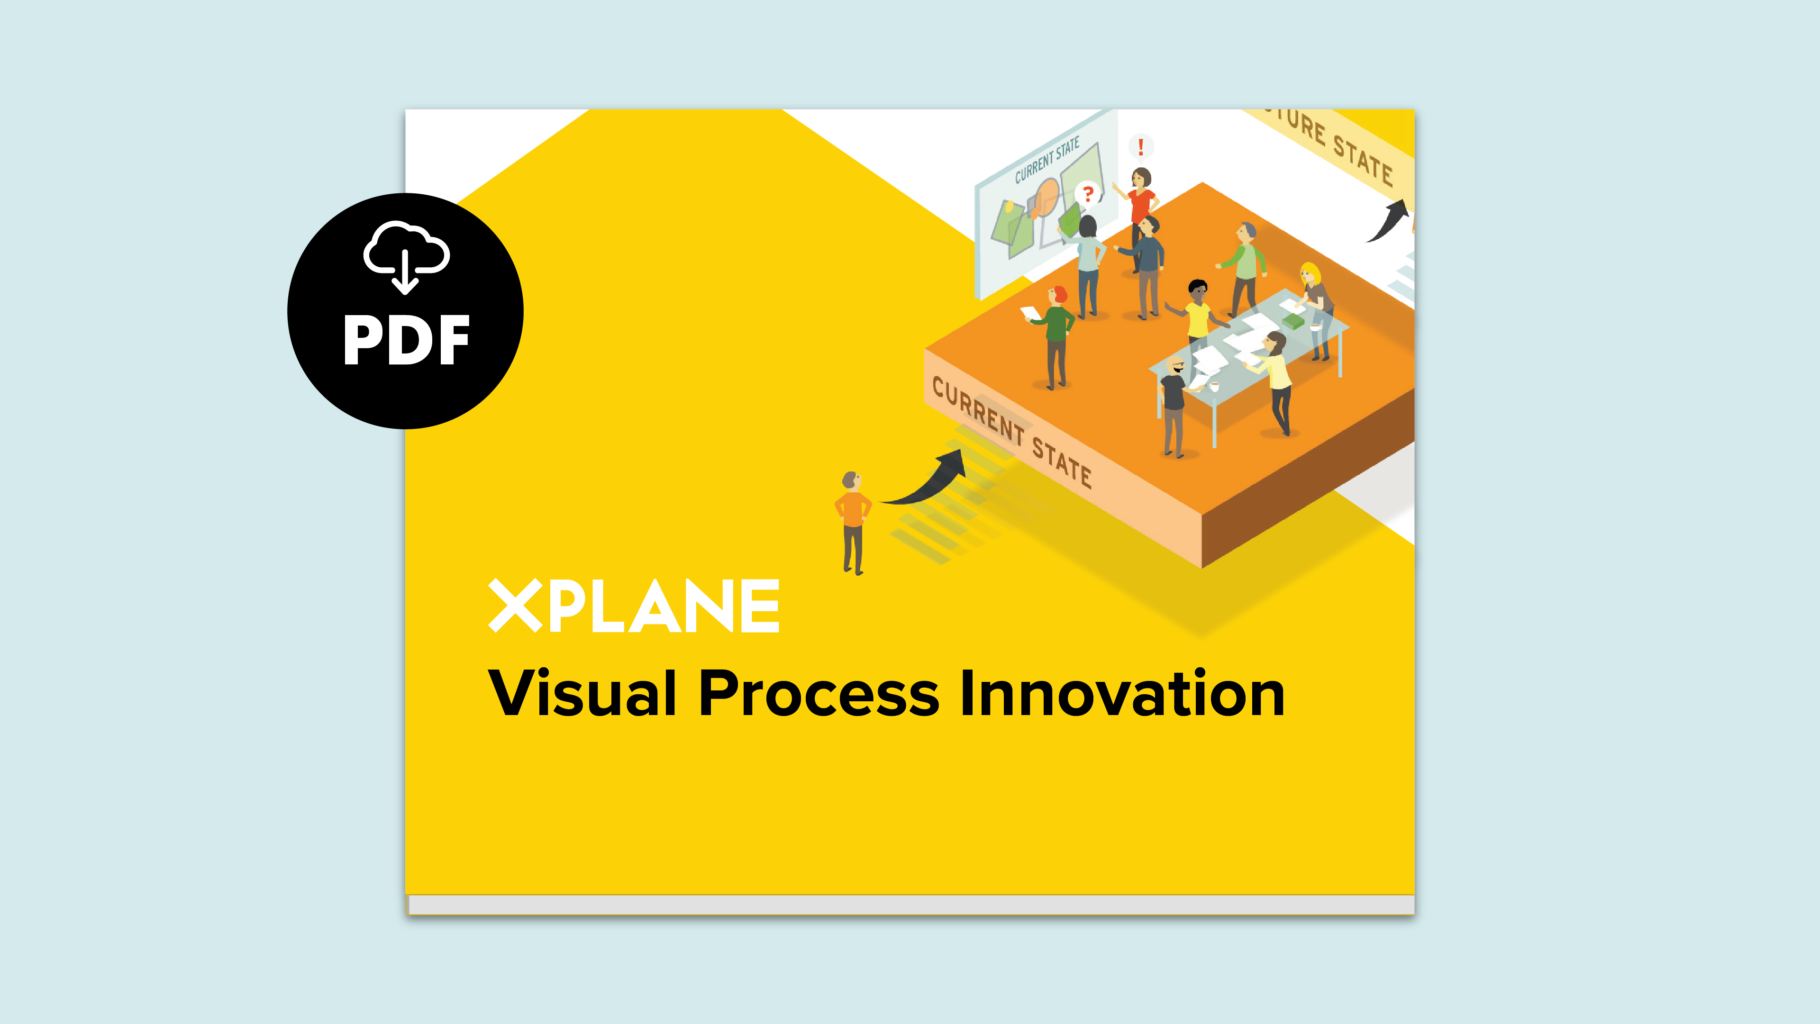 Image of Visual Process Innovation eBook. A black circle with "PDF" at the center shows this is a downloadable eBook. Against a light blue background.